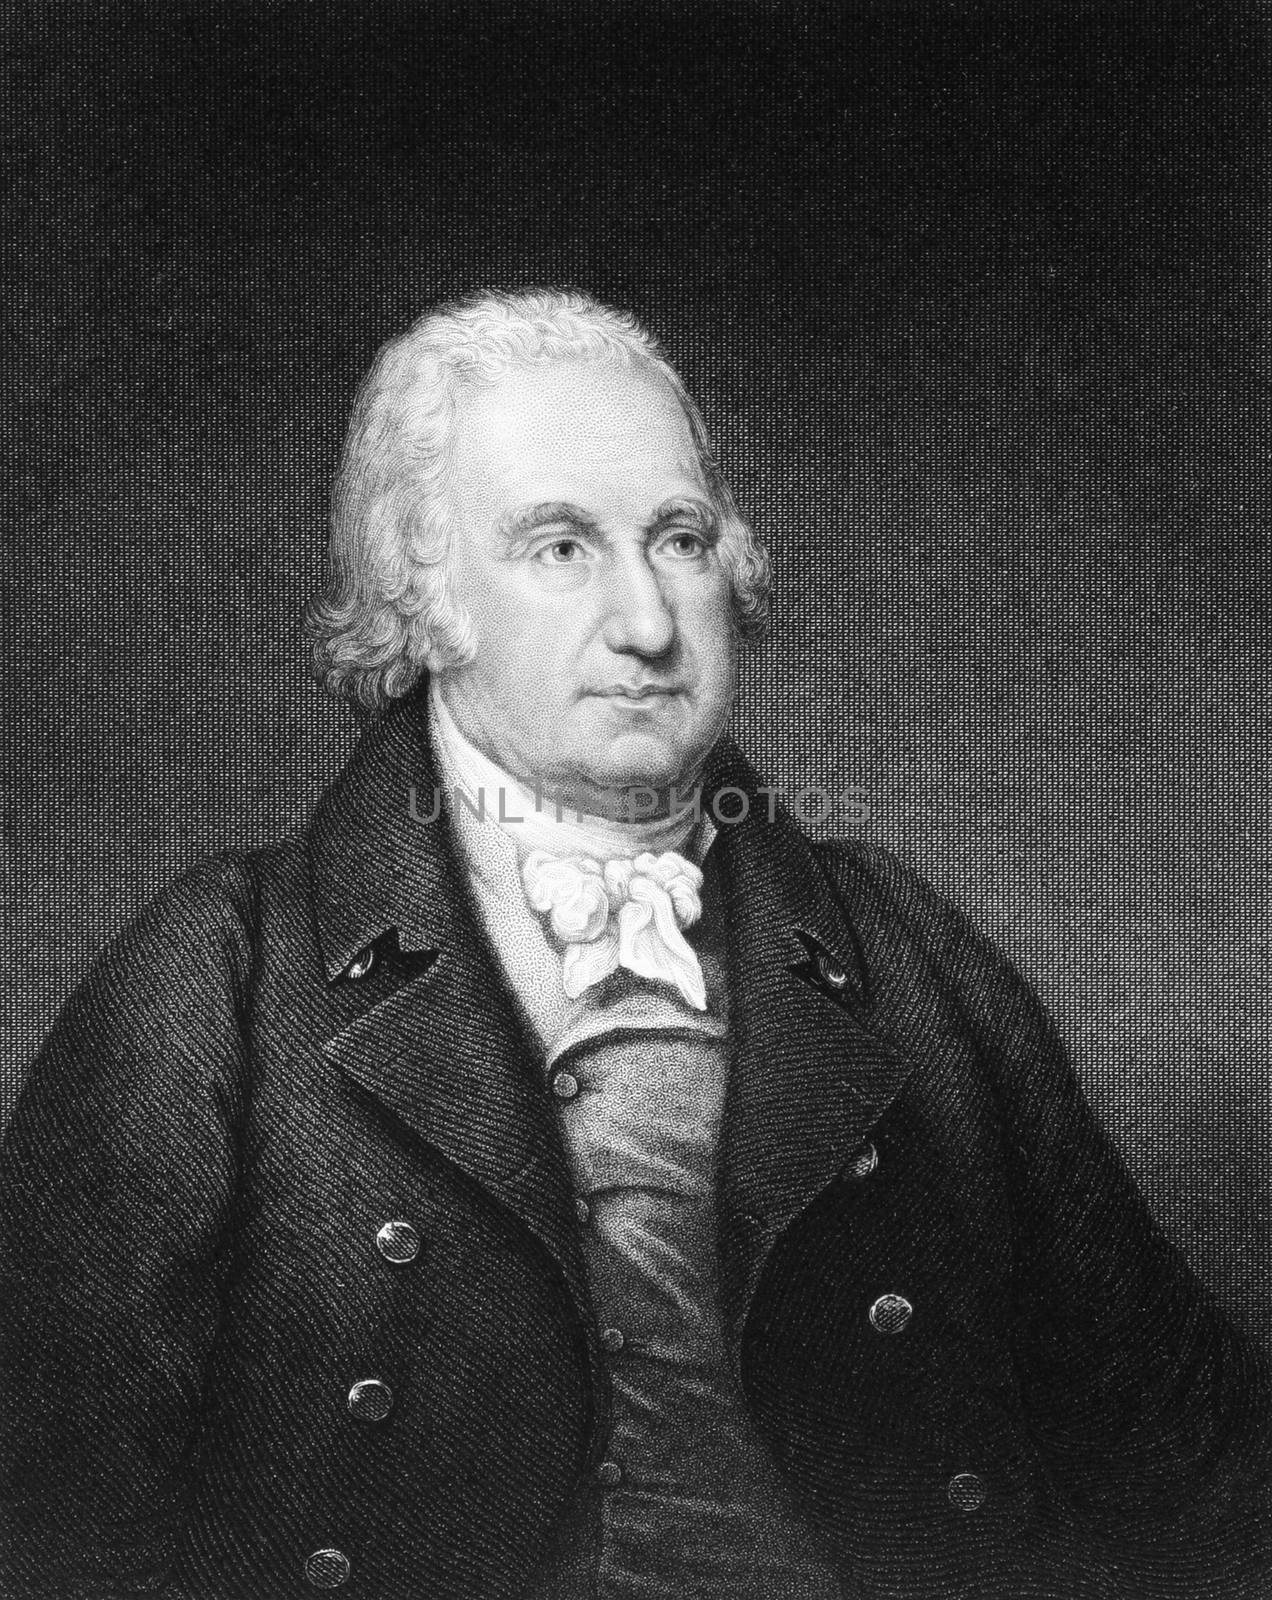 John Eager Howard (1752-1827) on engraving from 1835. American soldier and politician from Maryland. Engraved by E.Prudhomme and published in ''National Portrait Gallery of Distinguished Americans Volume II'',USA,1835.